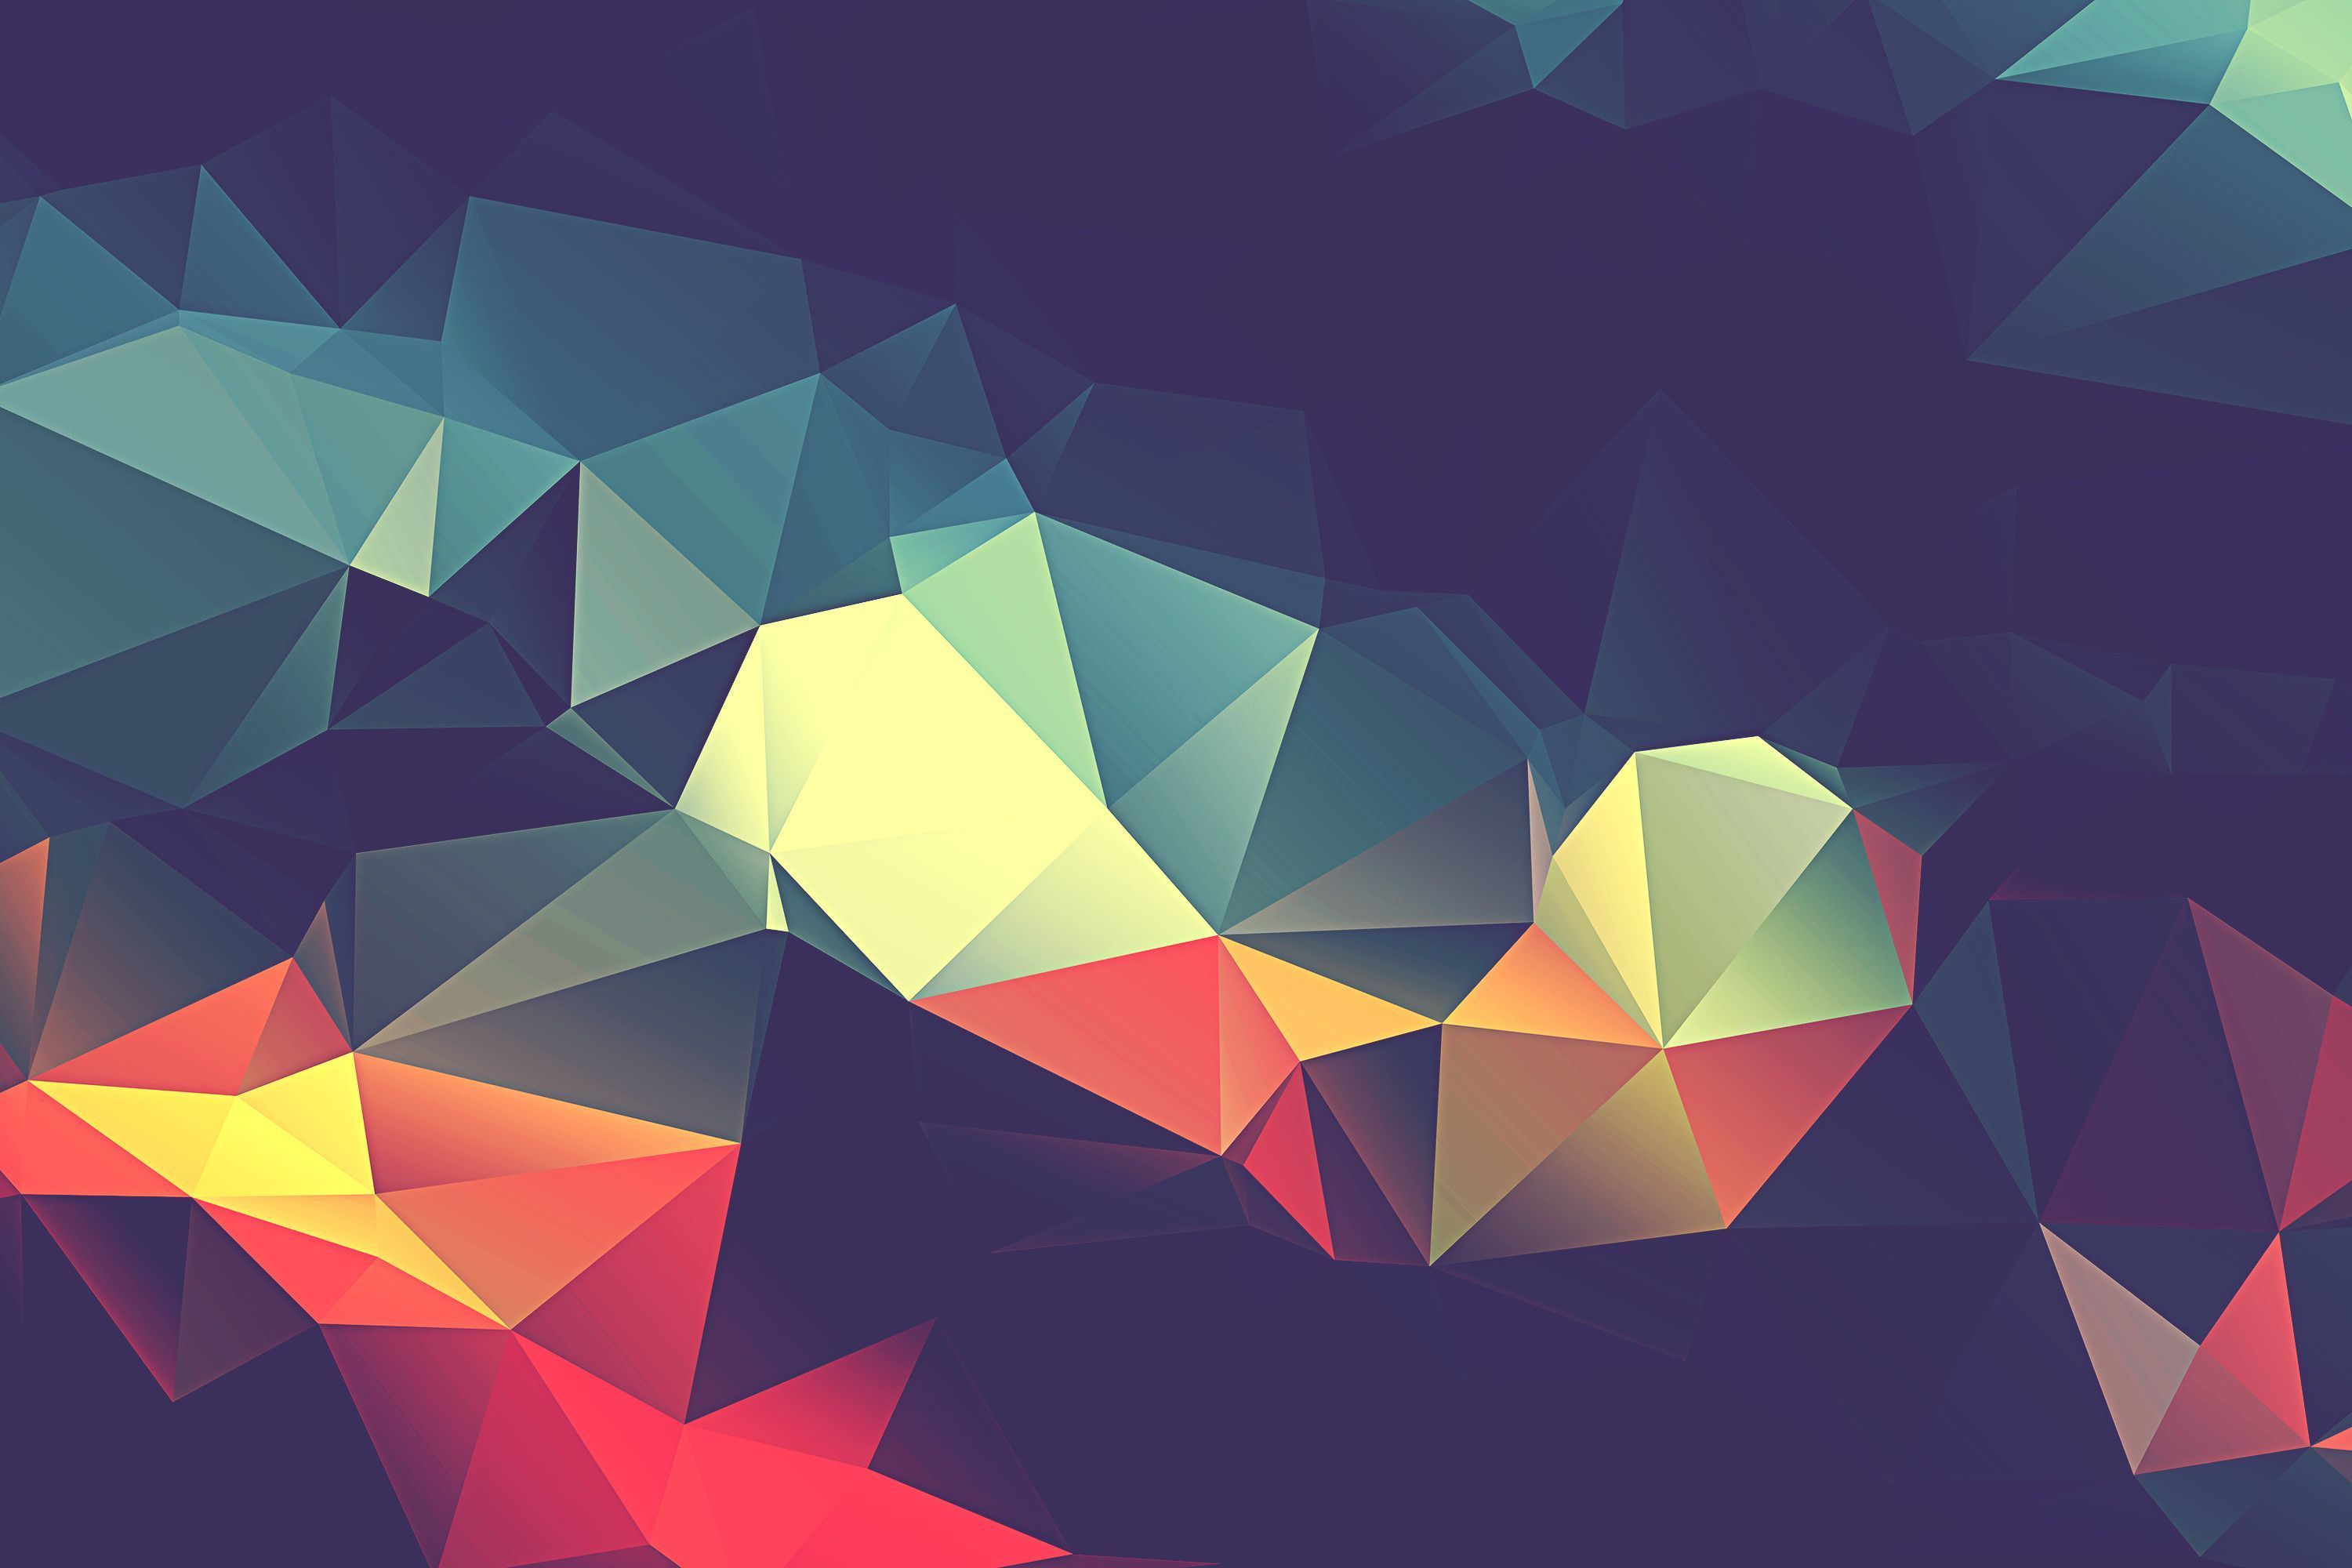 A colorful abstract image of triangles - Low poly